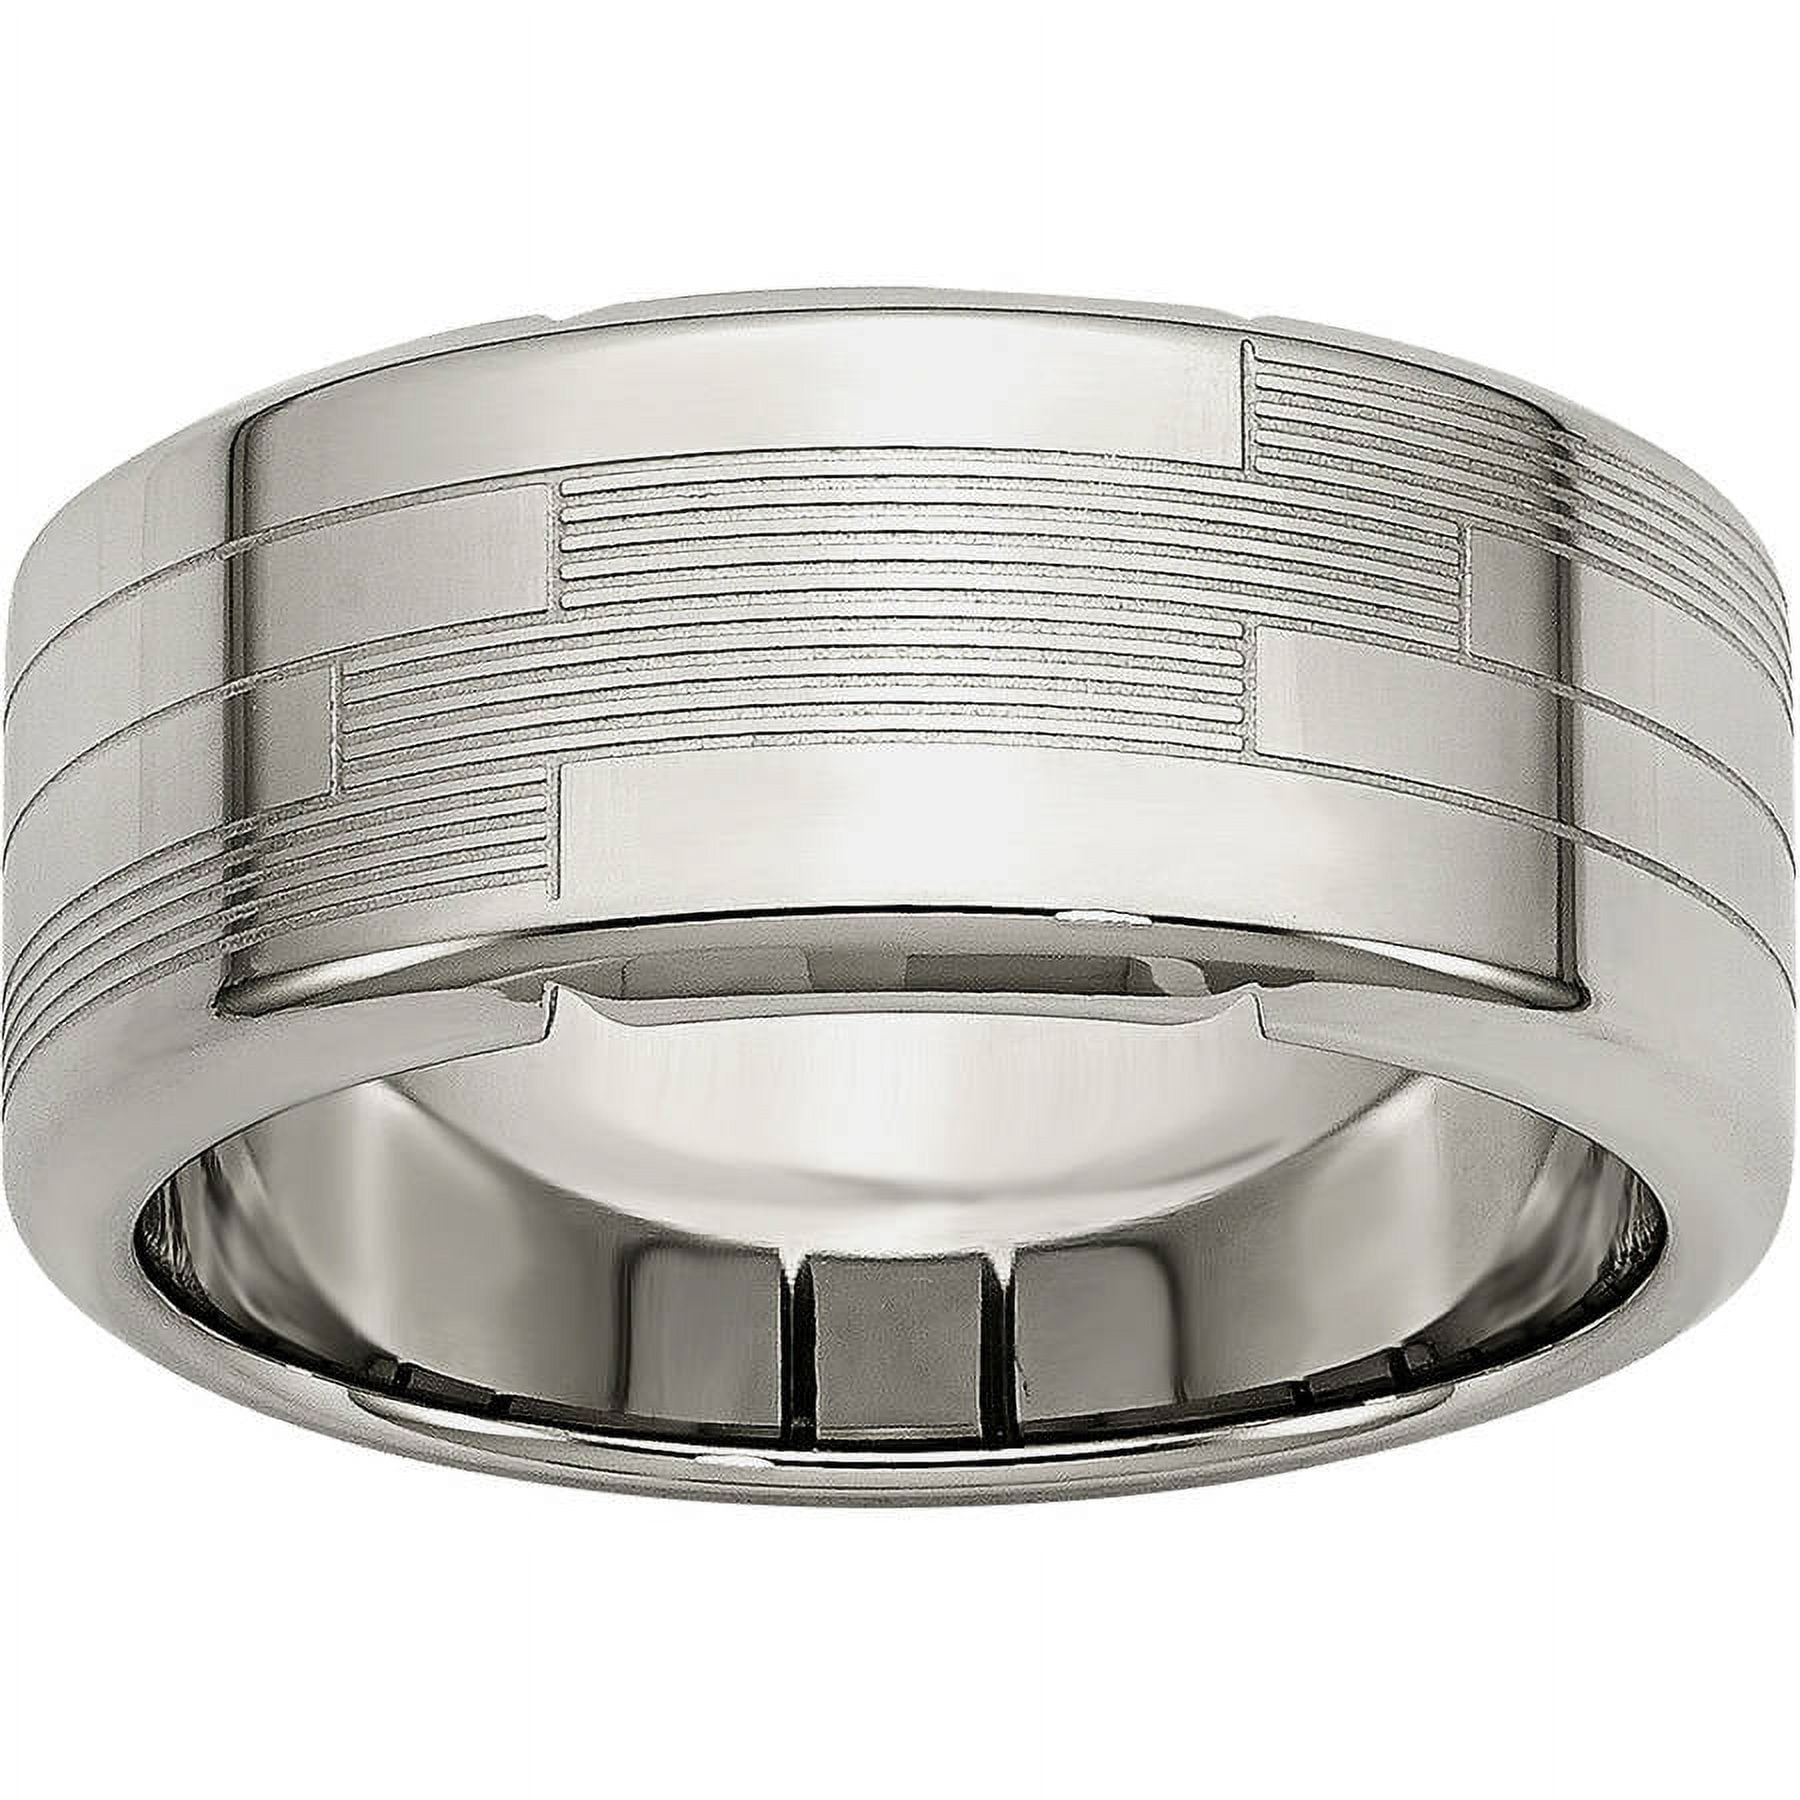  AeraVida Plain Cigar Band 10mm Width .925 Silver Ring, Casual  Rings For Unisex, Statement Fashion, Promise Ring, Couple Unisex Ring